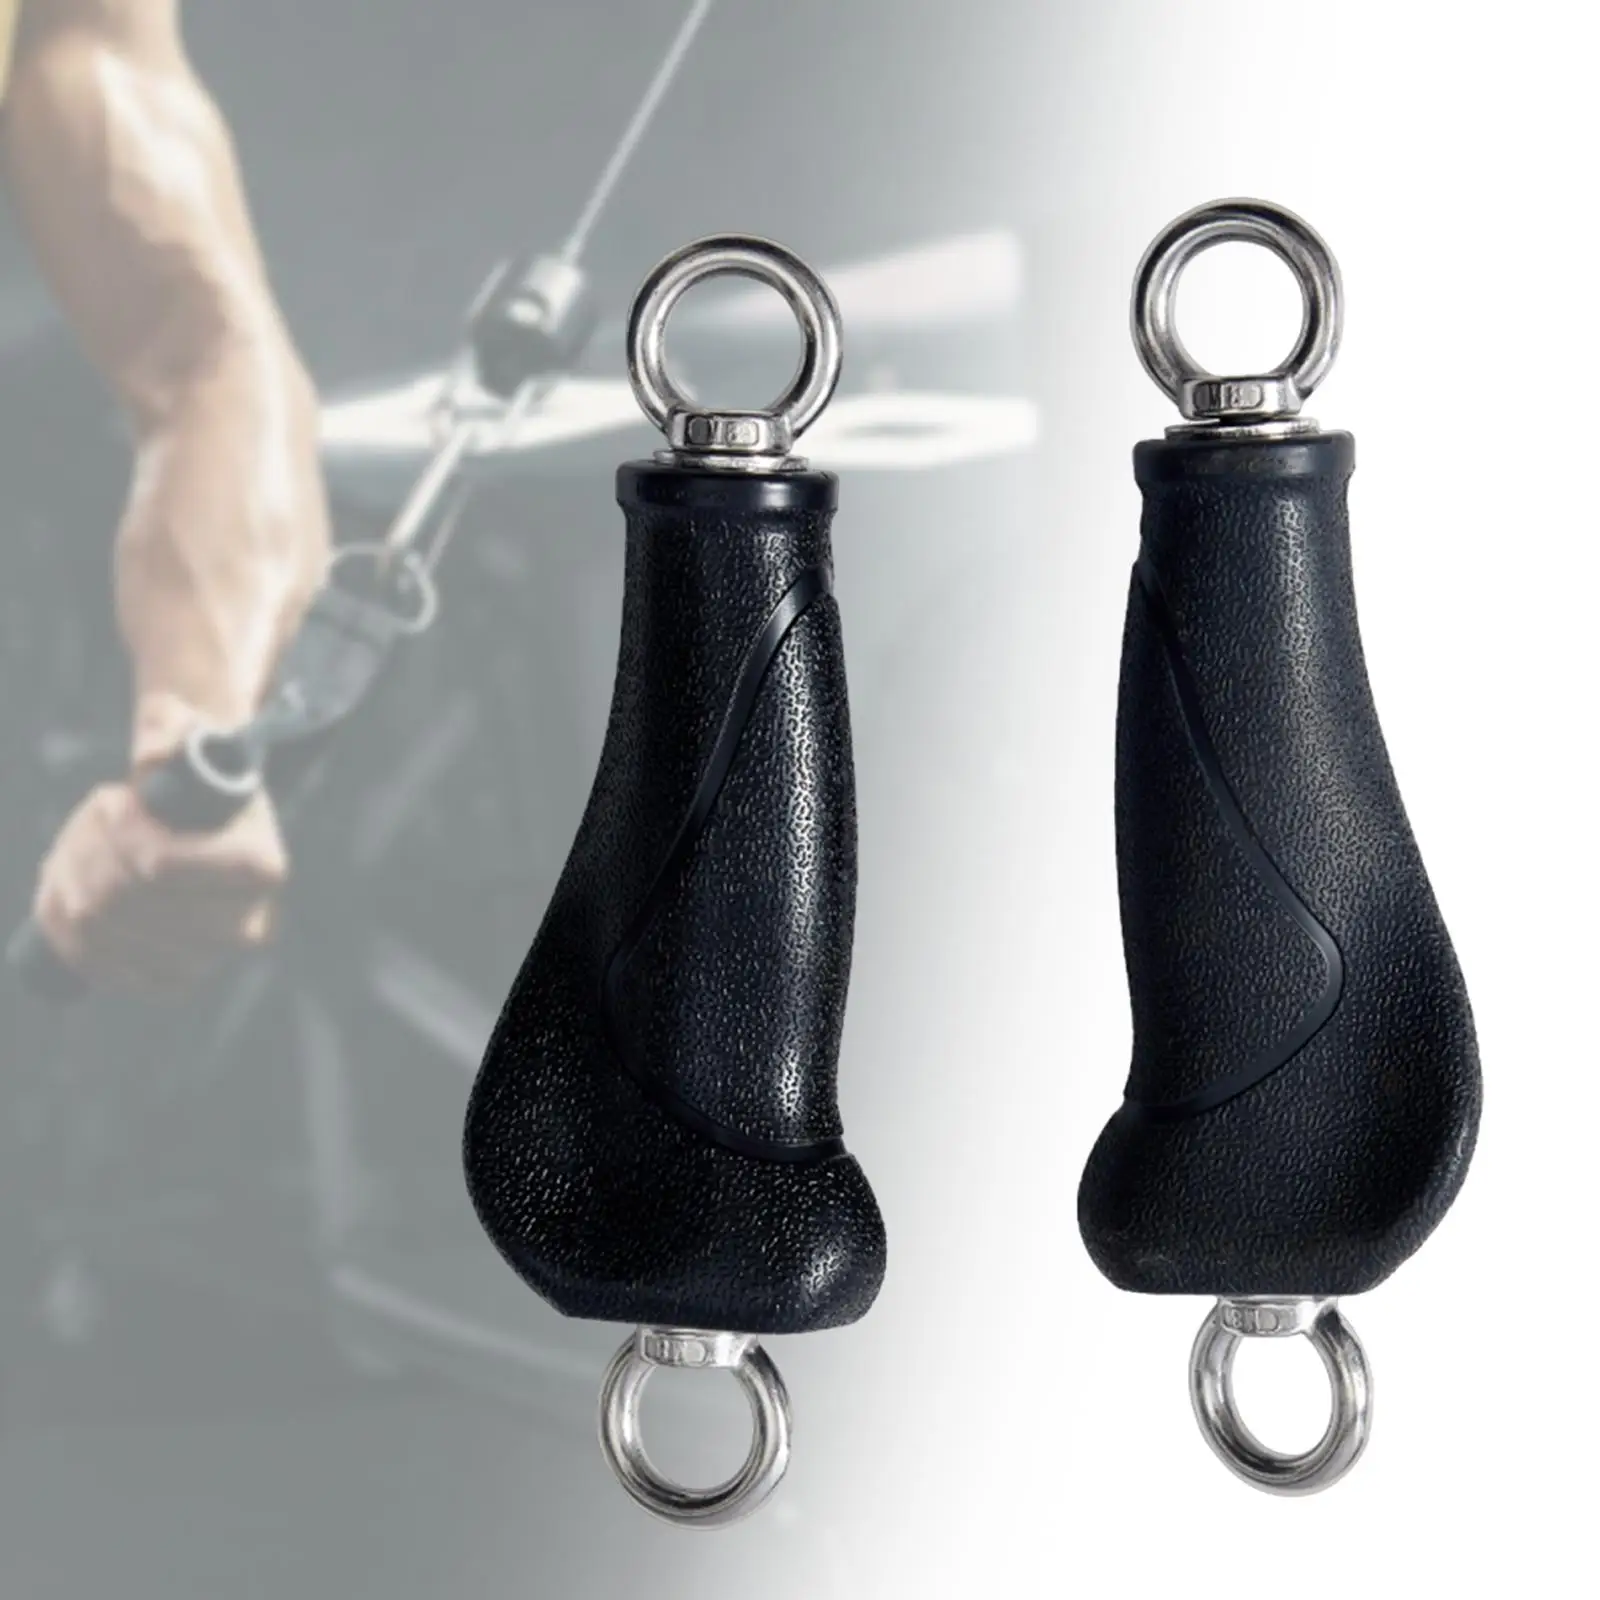 

2Pcs Exercise Equipment Handles Grips,Pull up Grips Gym Workout Home with Rings for Shoulders Bodybuilding Exerciser Training